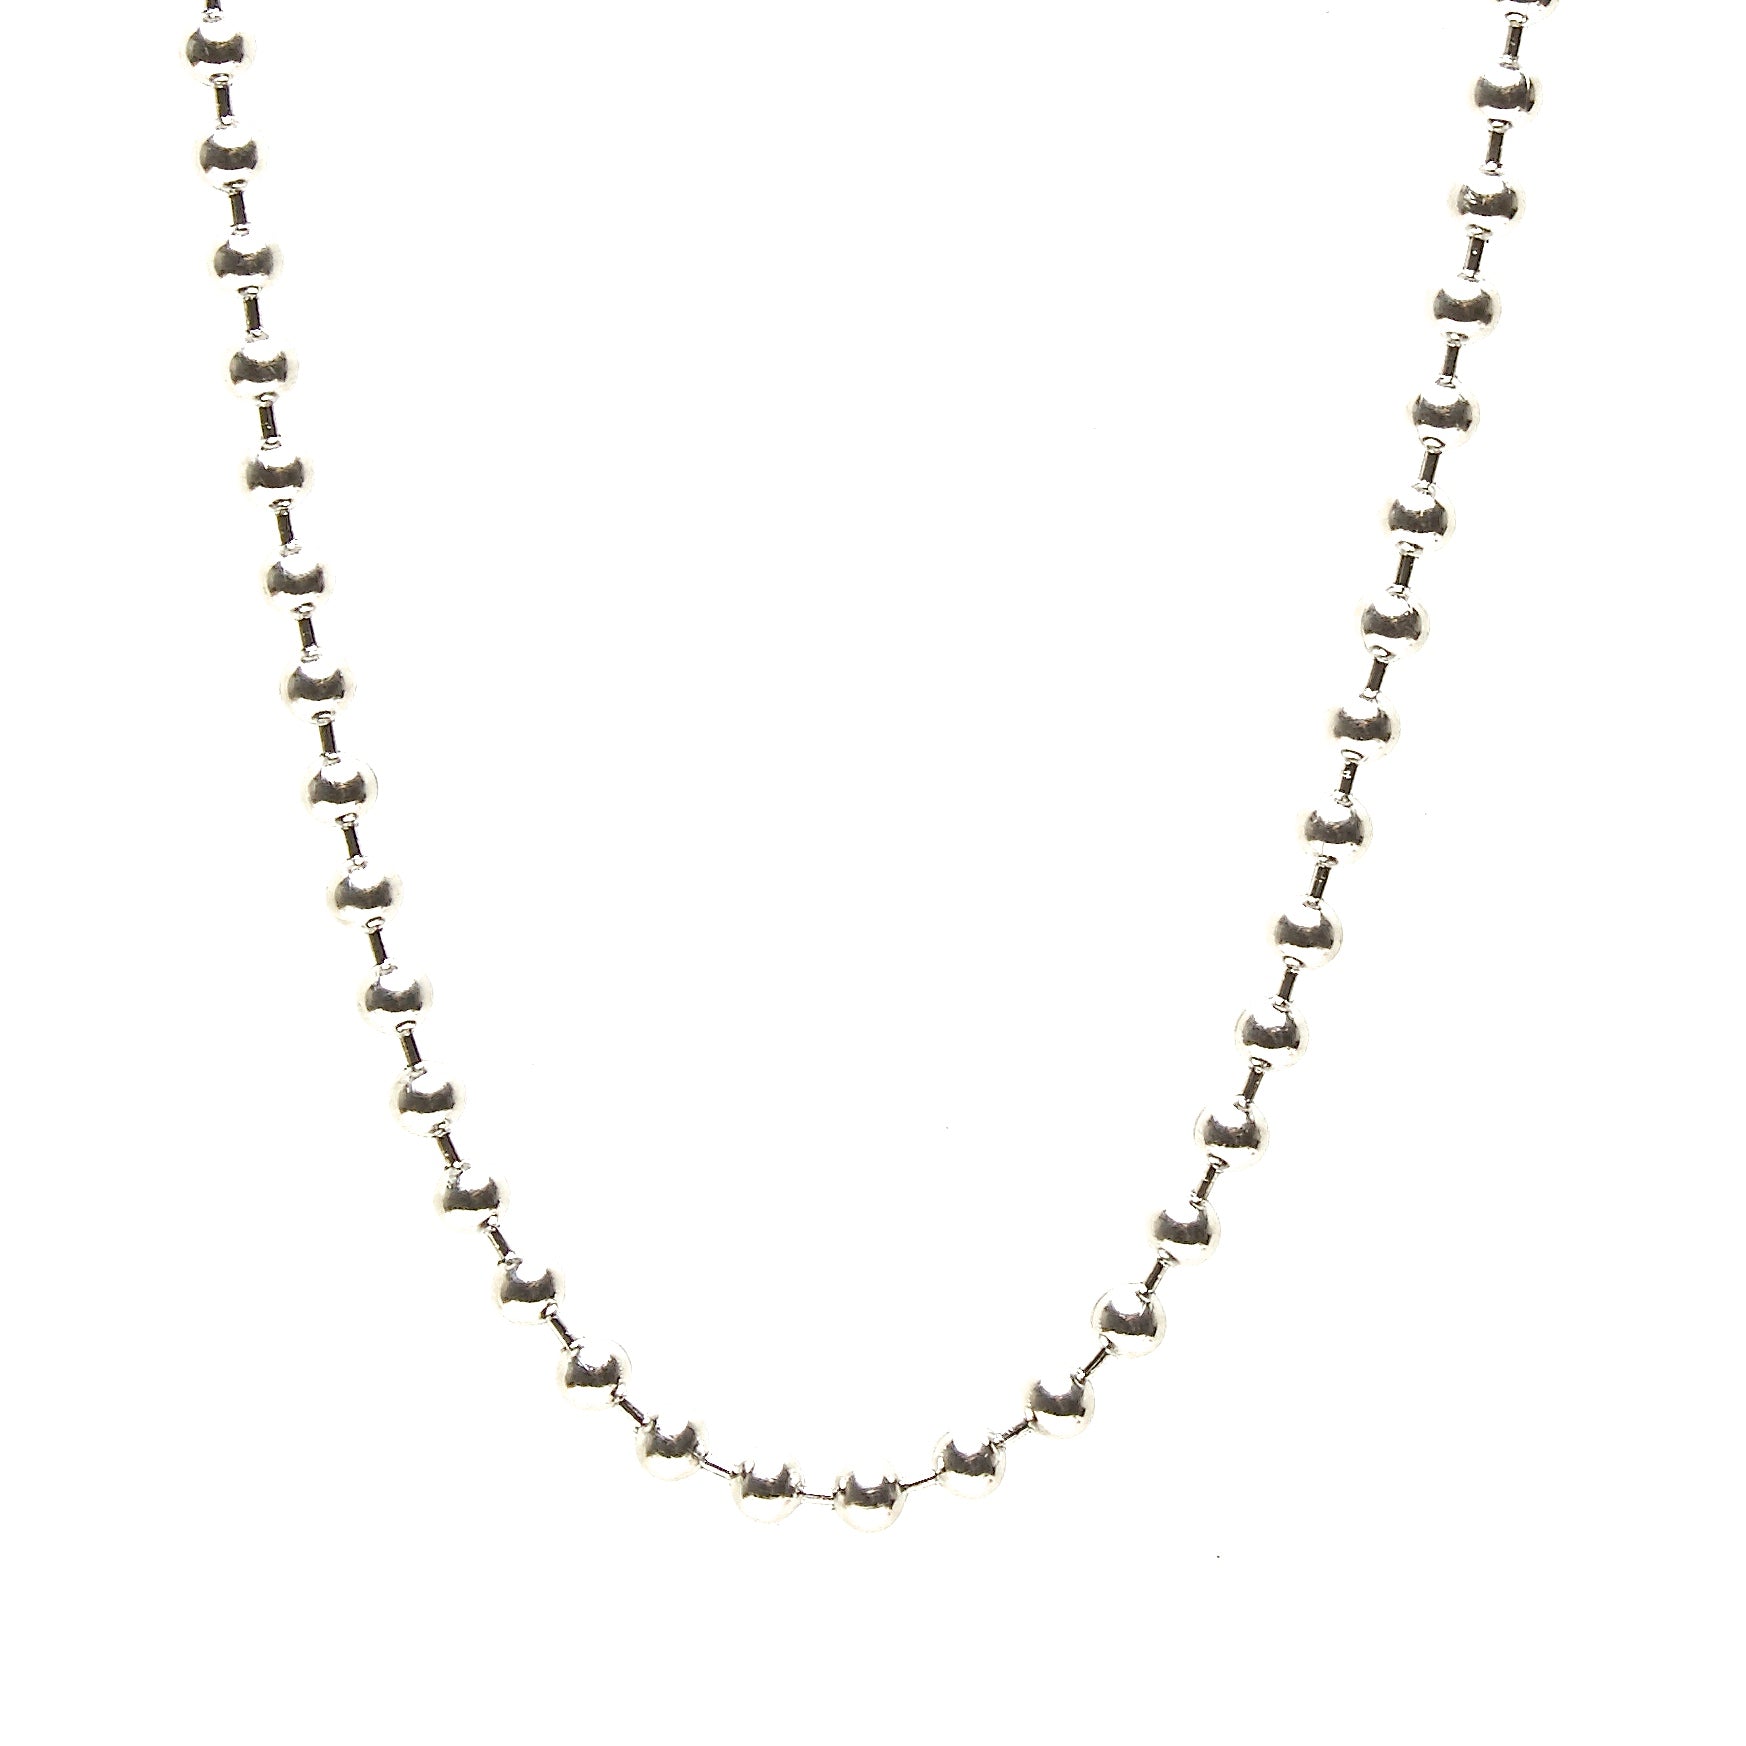 8-MM THICK STAINLESS STEEL BALL CHAIN NECKLACE. BY NYET JEWELRY.